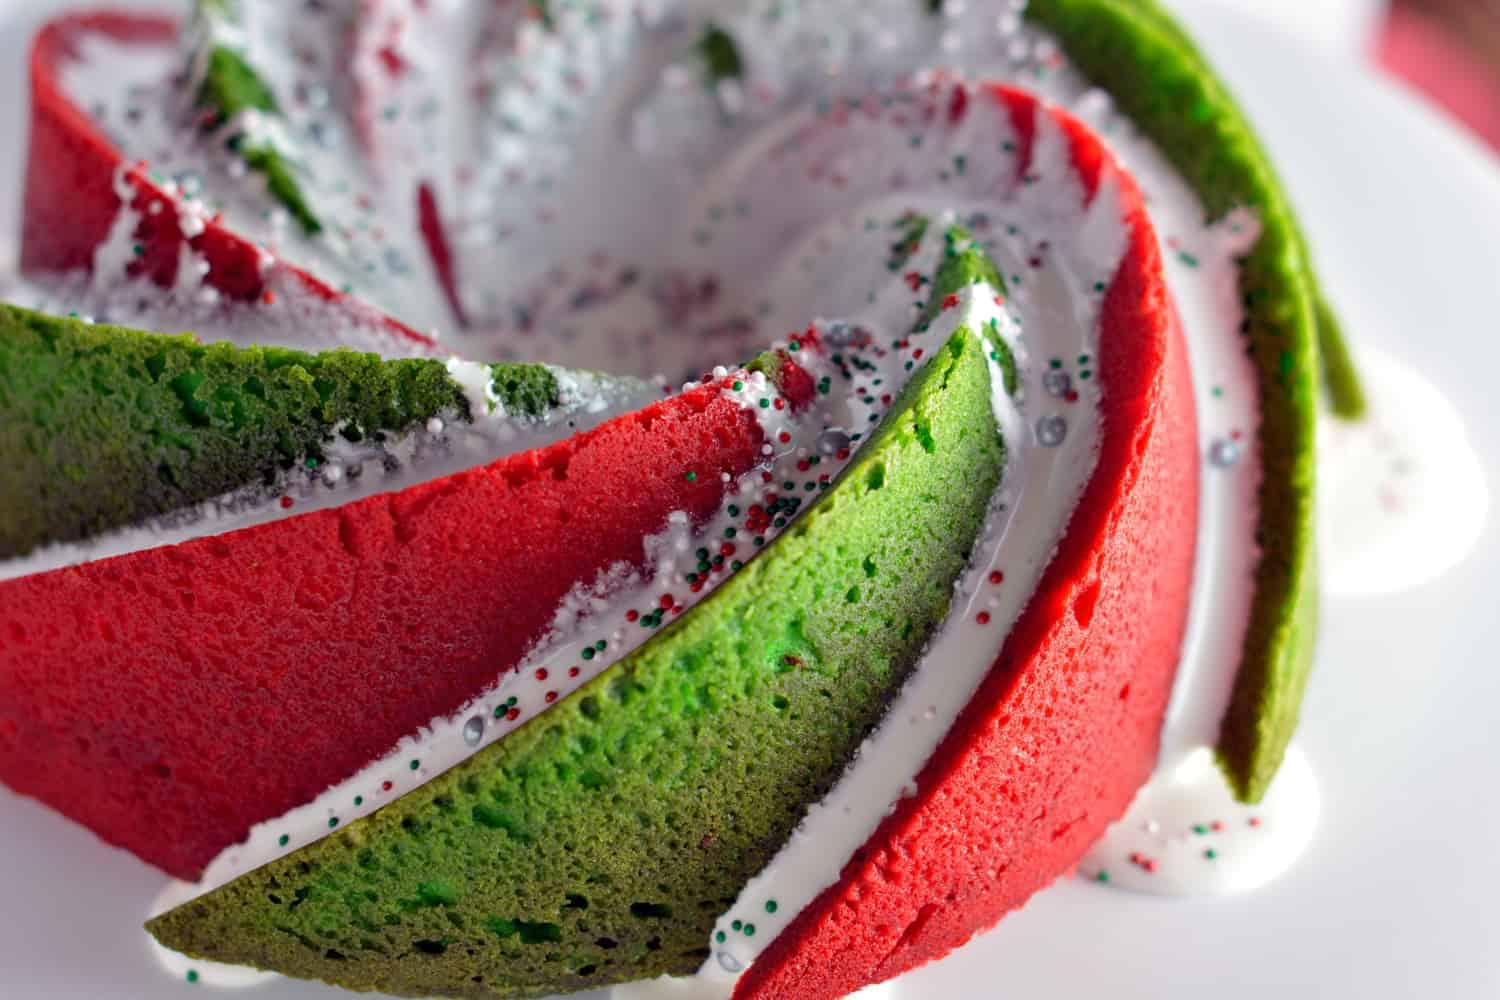 Christmas Bundt Cake A Festive Red And Green Holiday Cake